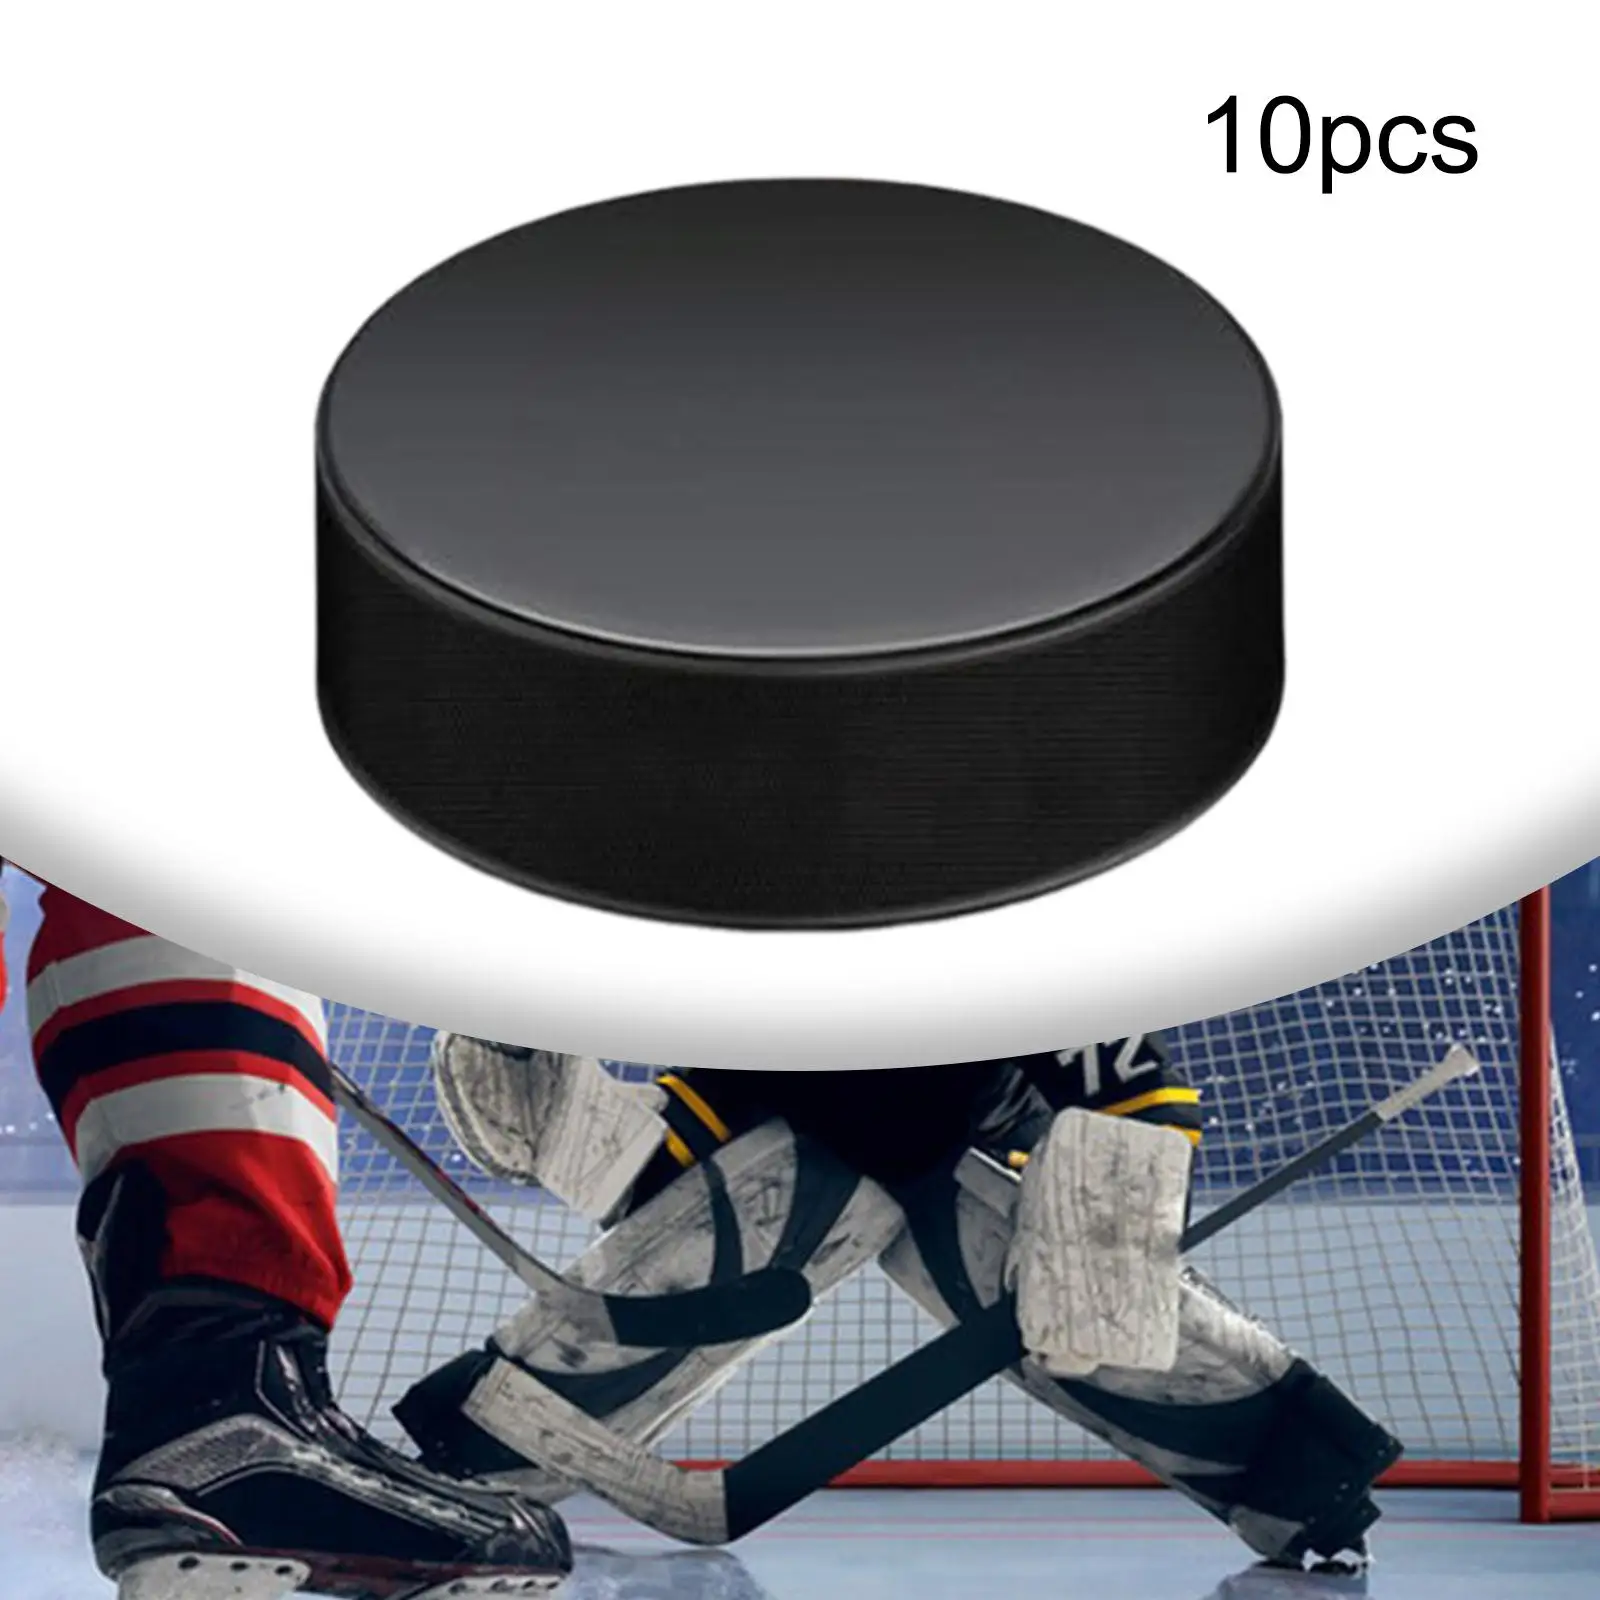 

Hockey Pucks Hockey Supplies 10 Pack Ice Hockey Pucks Hockey Balls for Outdoor Competition Exercising Professionals Indoor